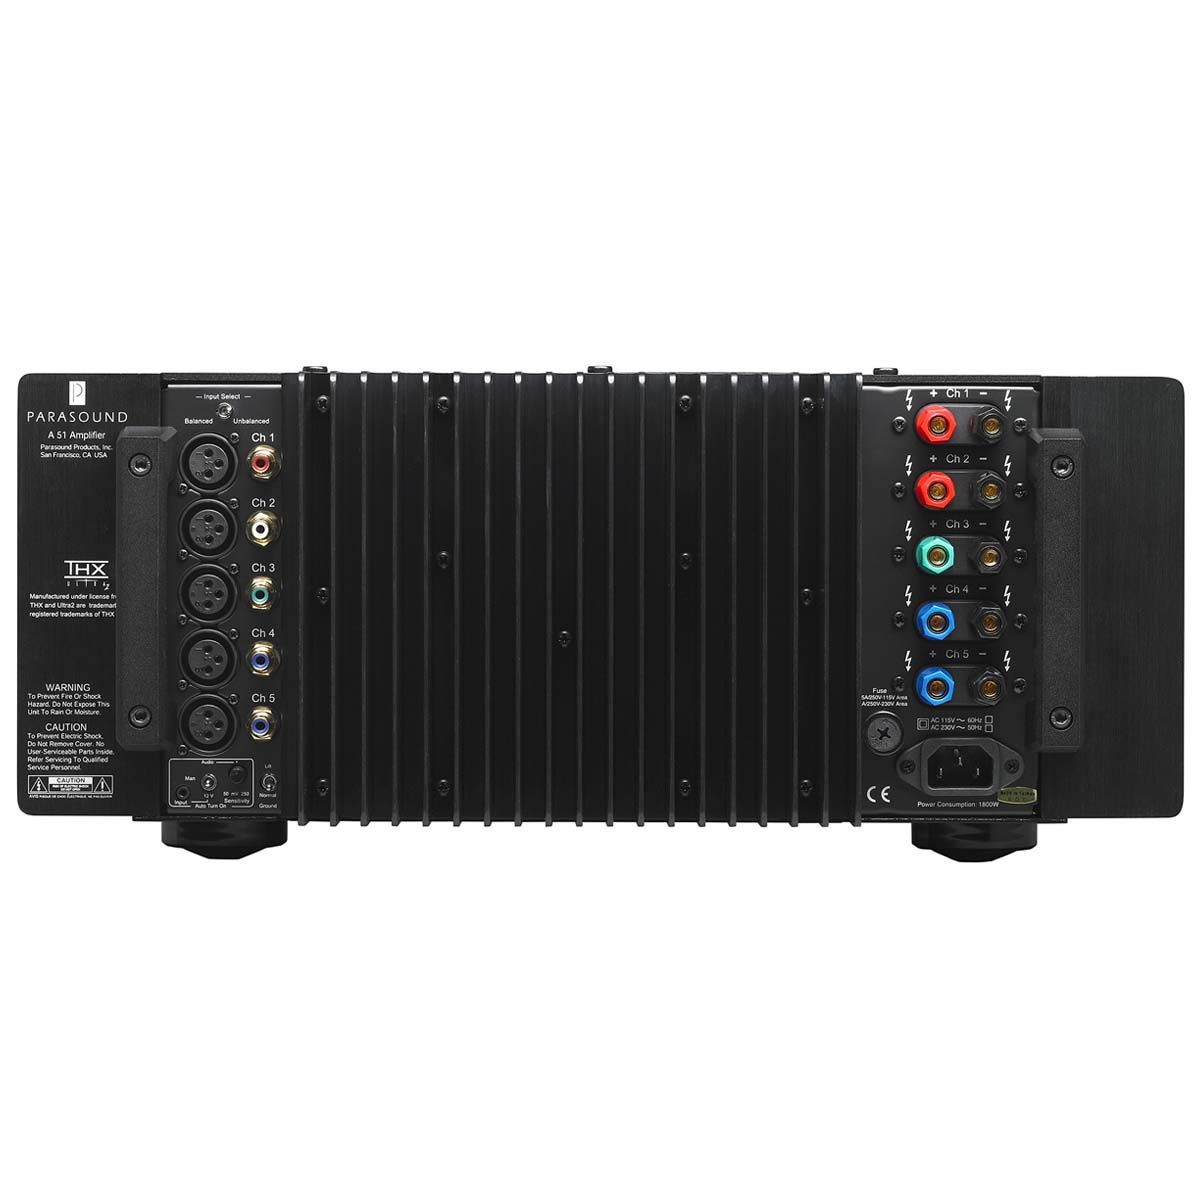 Parasound Halo A51 Five-Channel Power Amplifier rear view